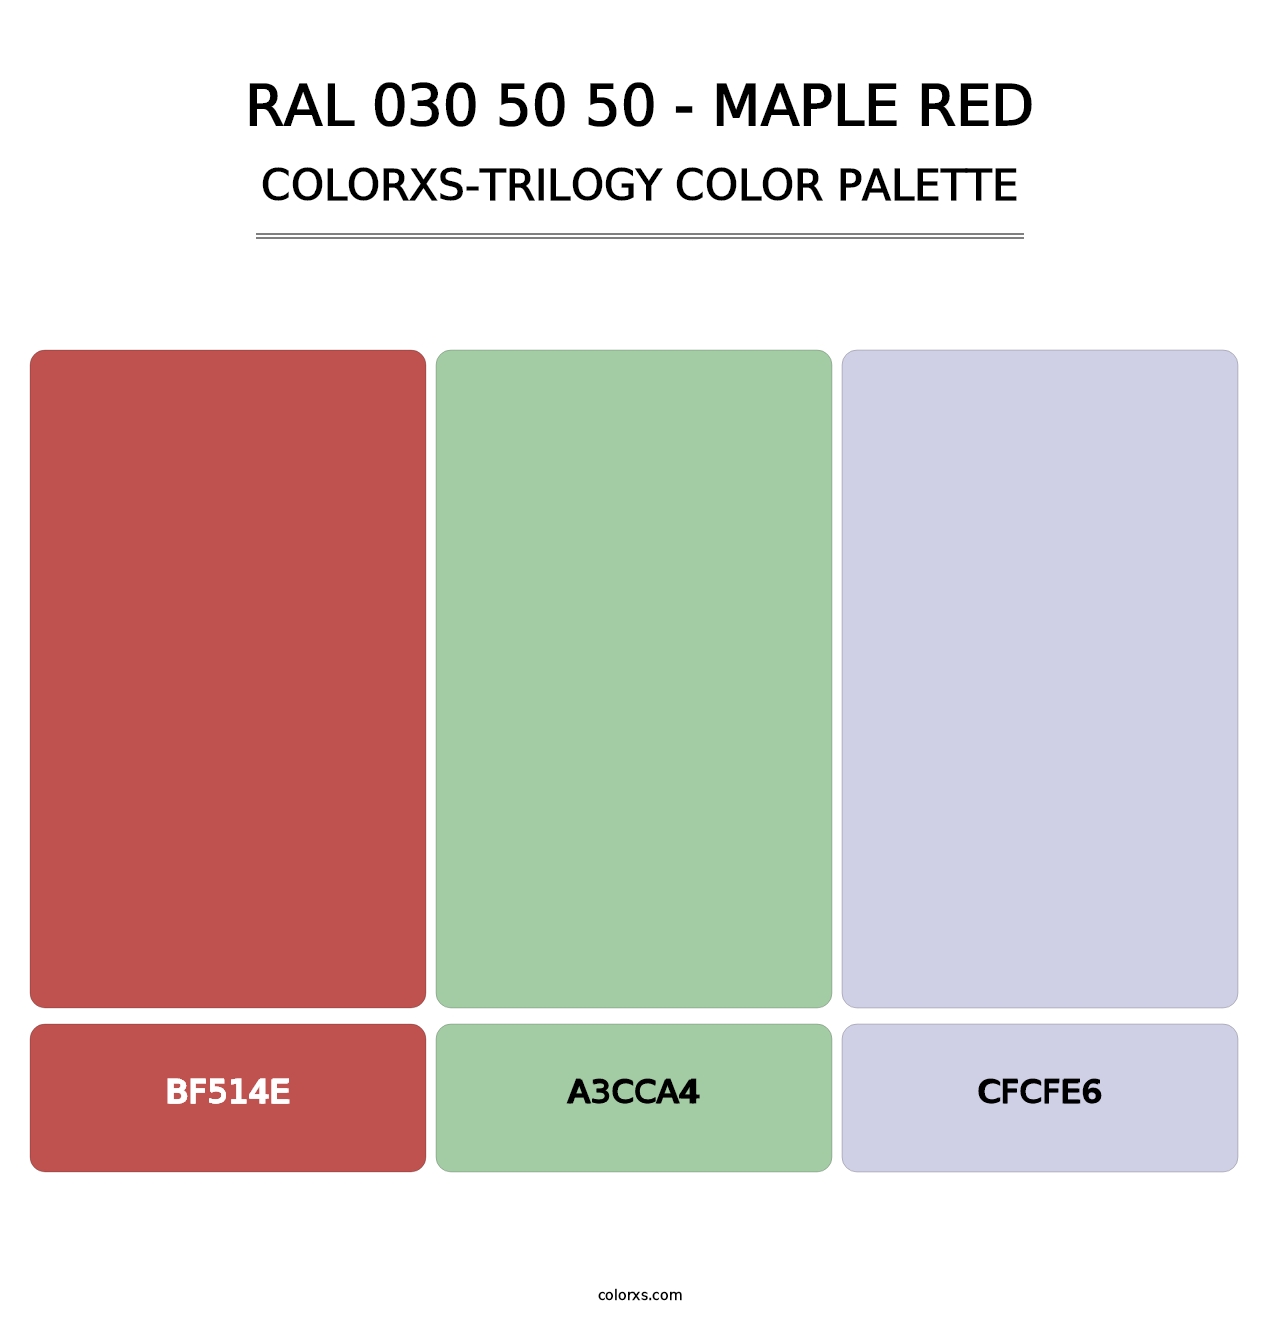 RAL 030 50 50 - Maple Red - Colorxs Trilogy Palette